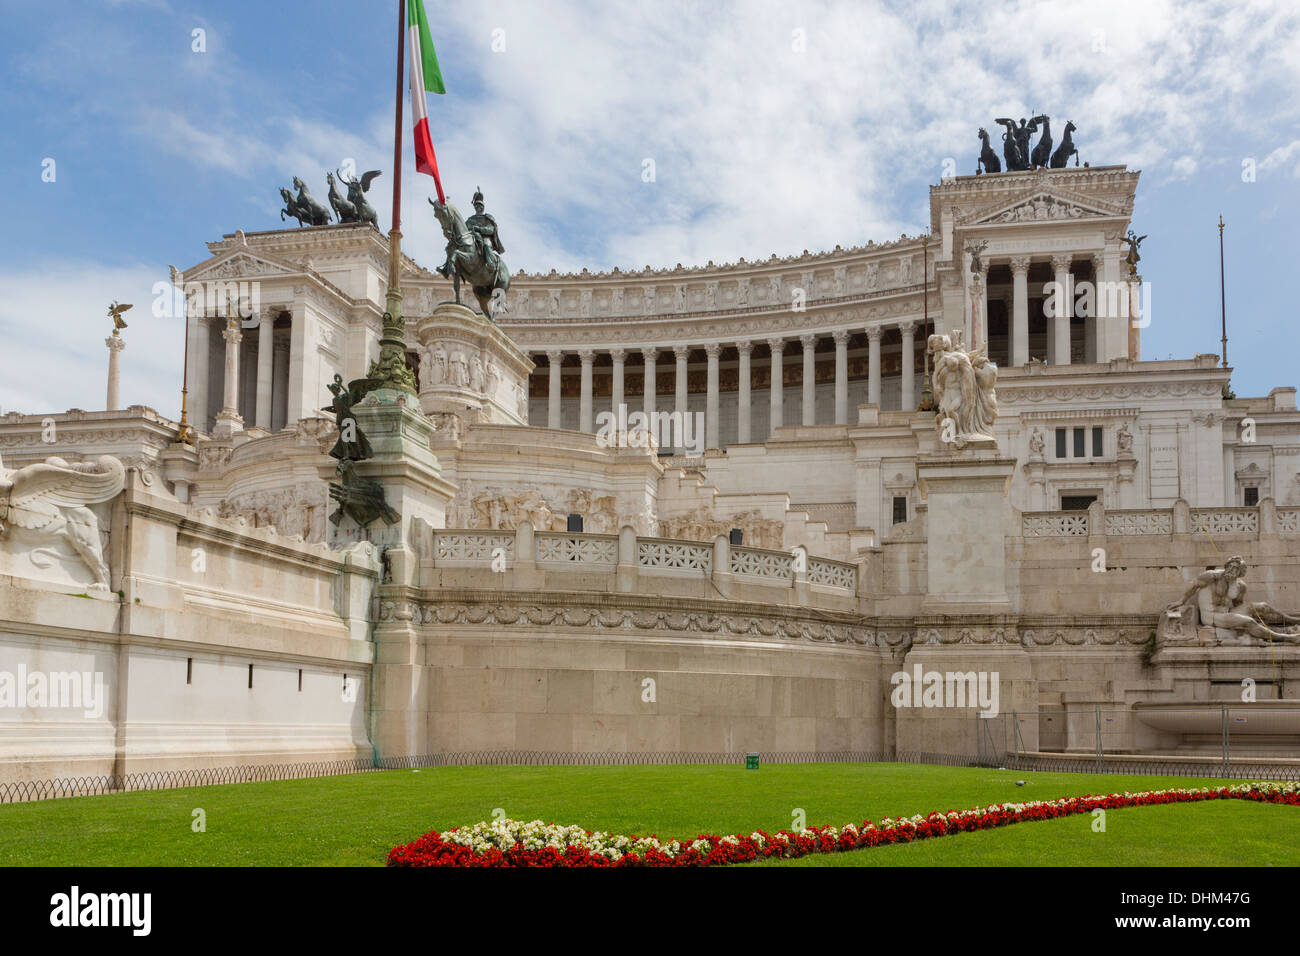 National Monument to Victor Emmanuel II  in Rome, Italy, shot from an angle on a sunny day. Stock Photo